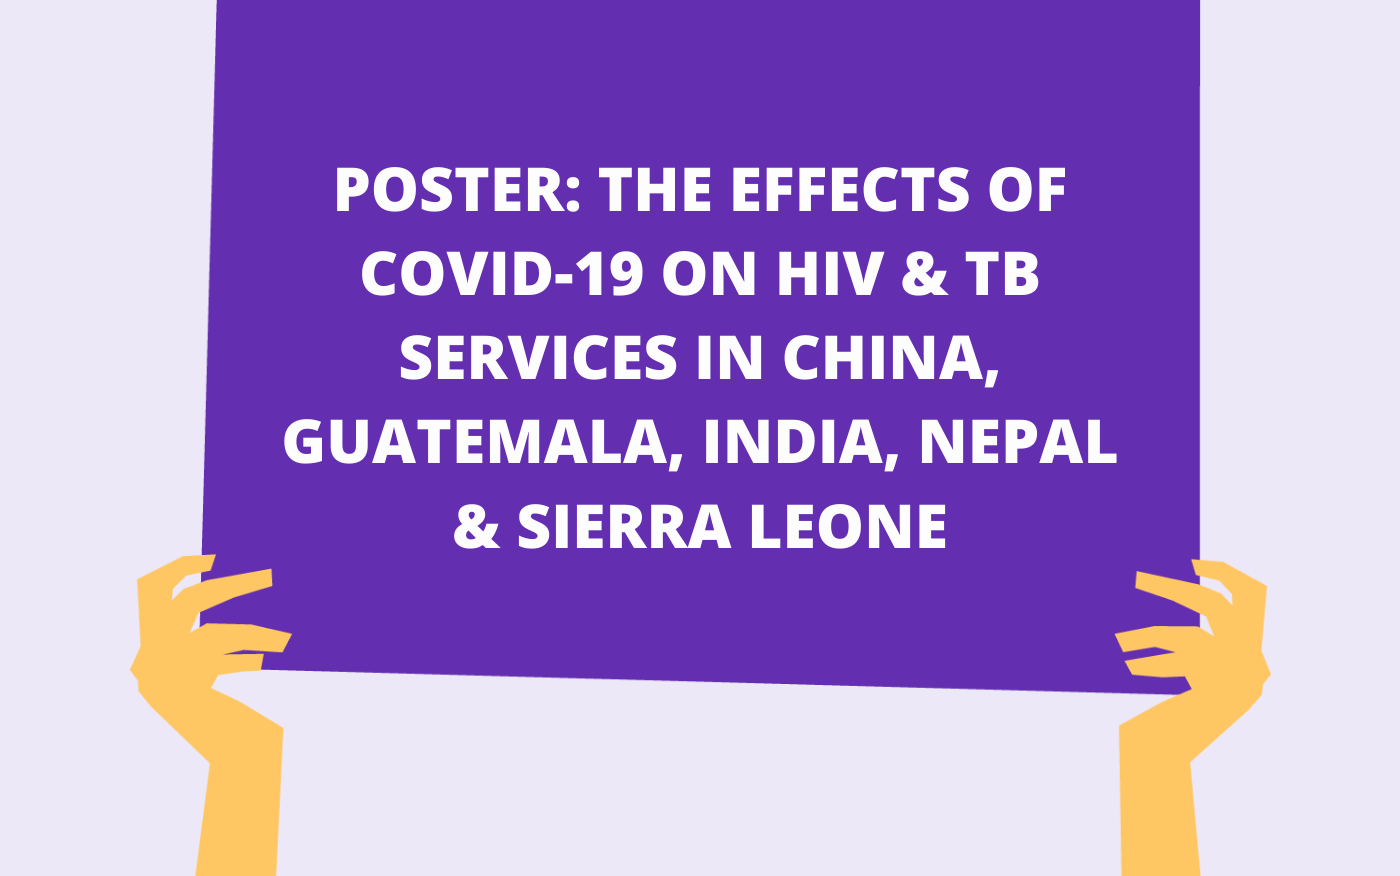 POSTER: The effects of Covid-19 on HIV & TB services in China, Guatemala, India, Nepal & Sierra Leone